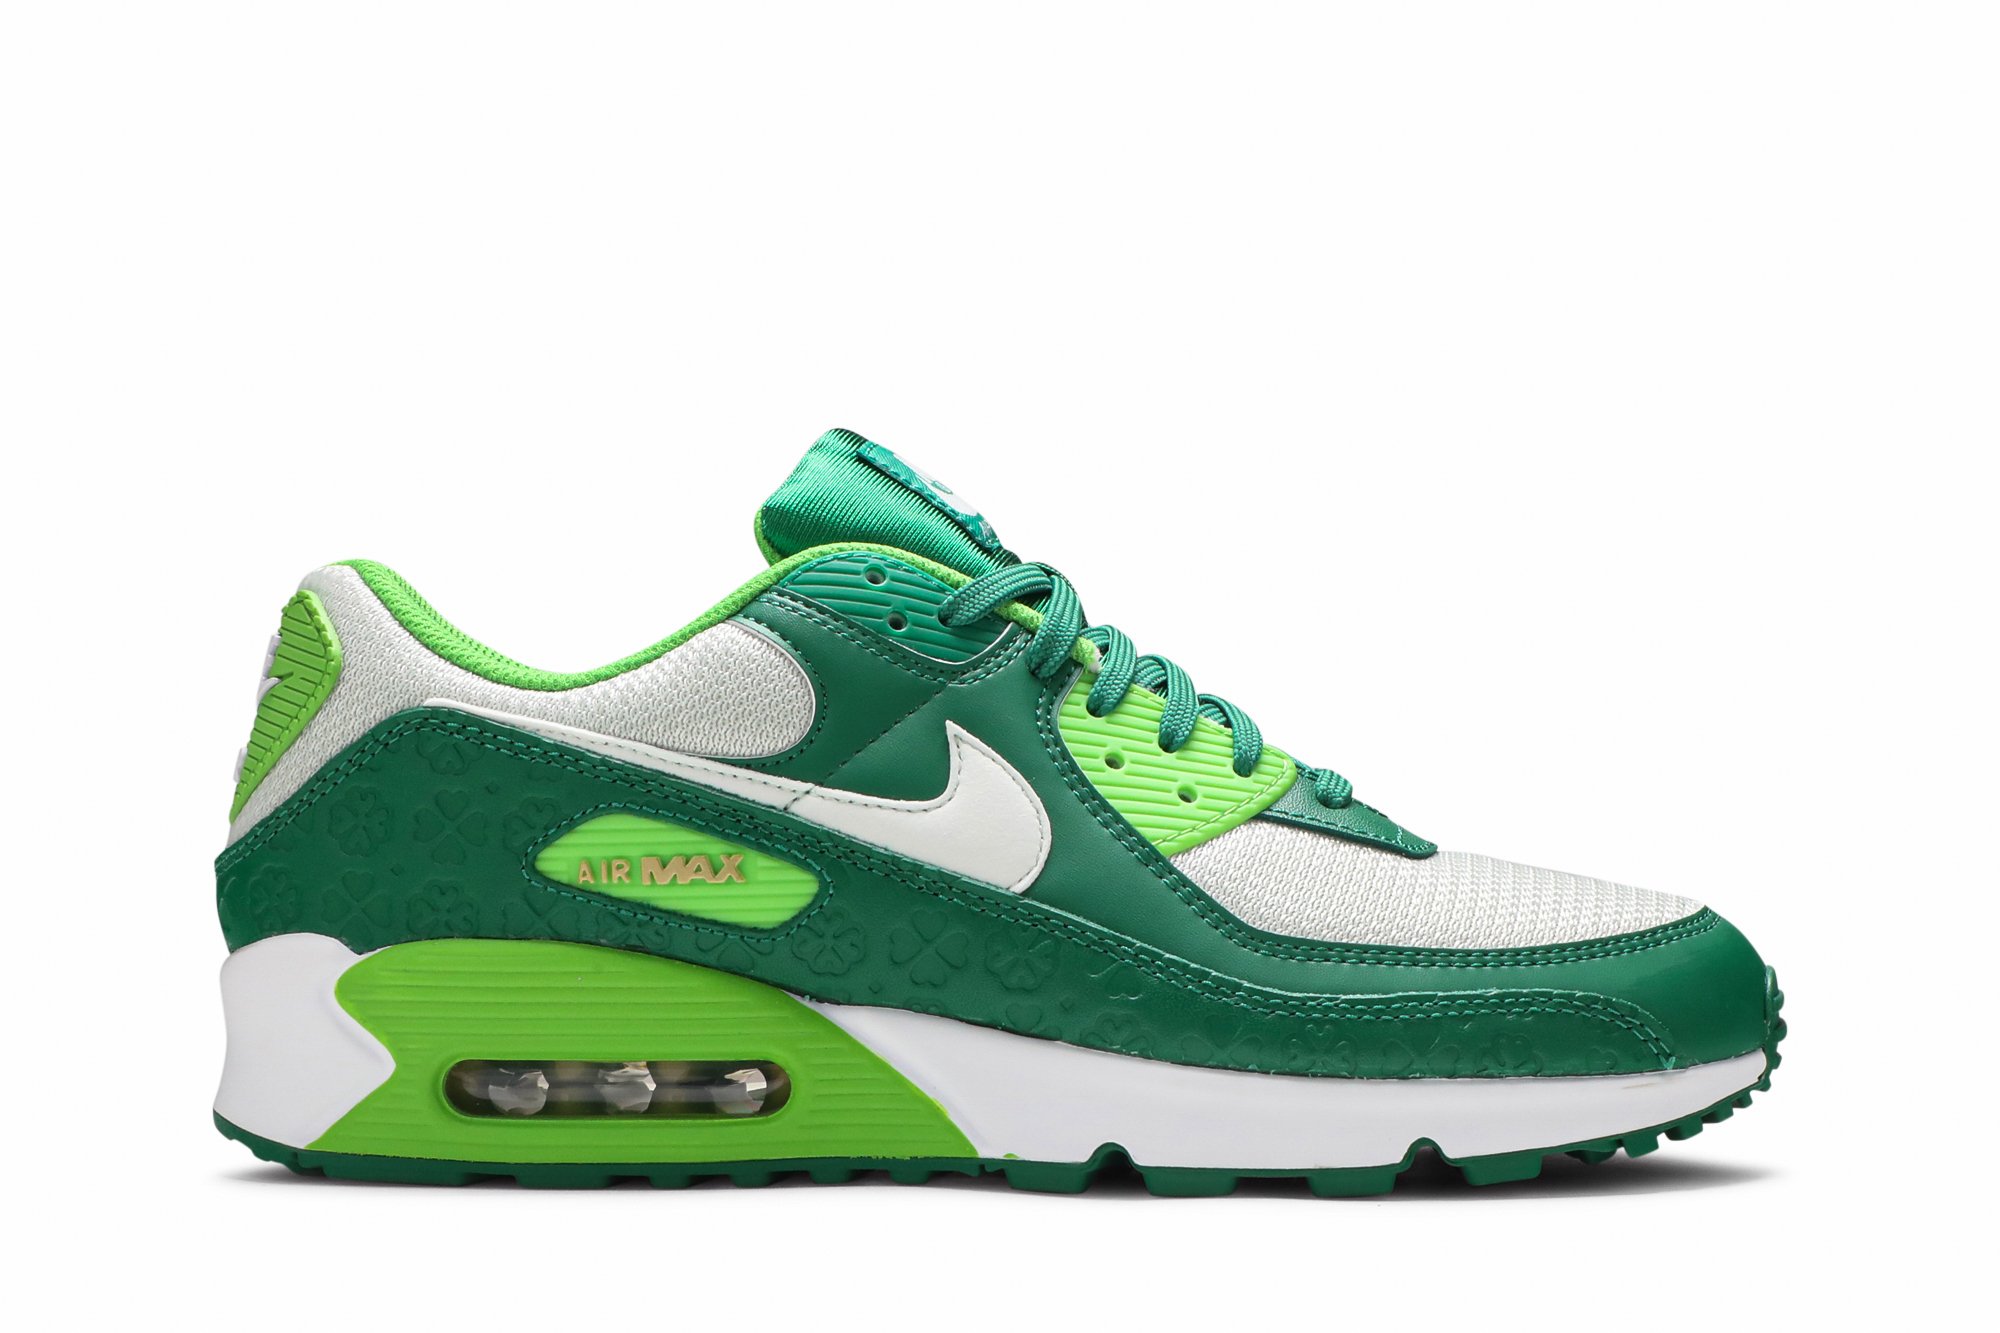 Buy Air Max 90 'St. Patrick's Day' - DD8555 300 | GOAT